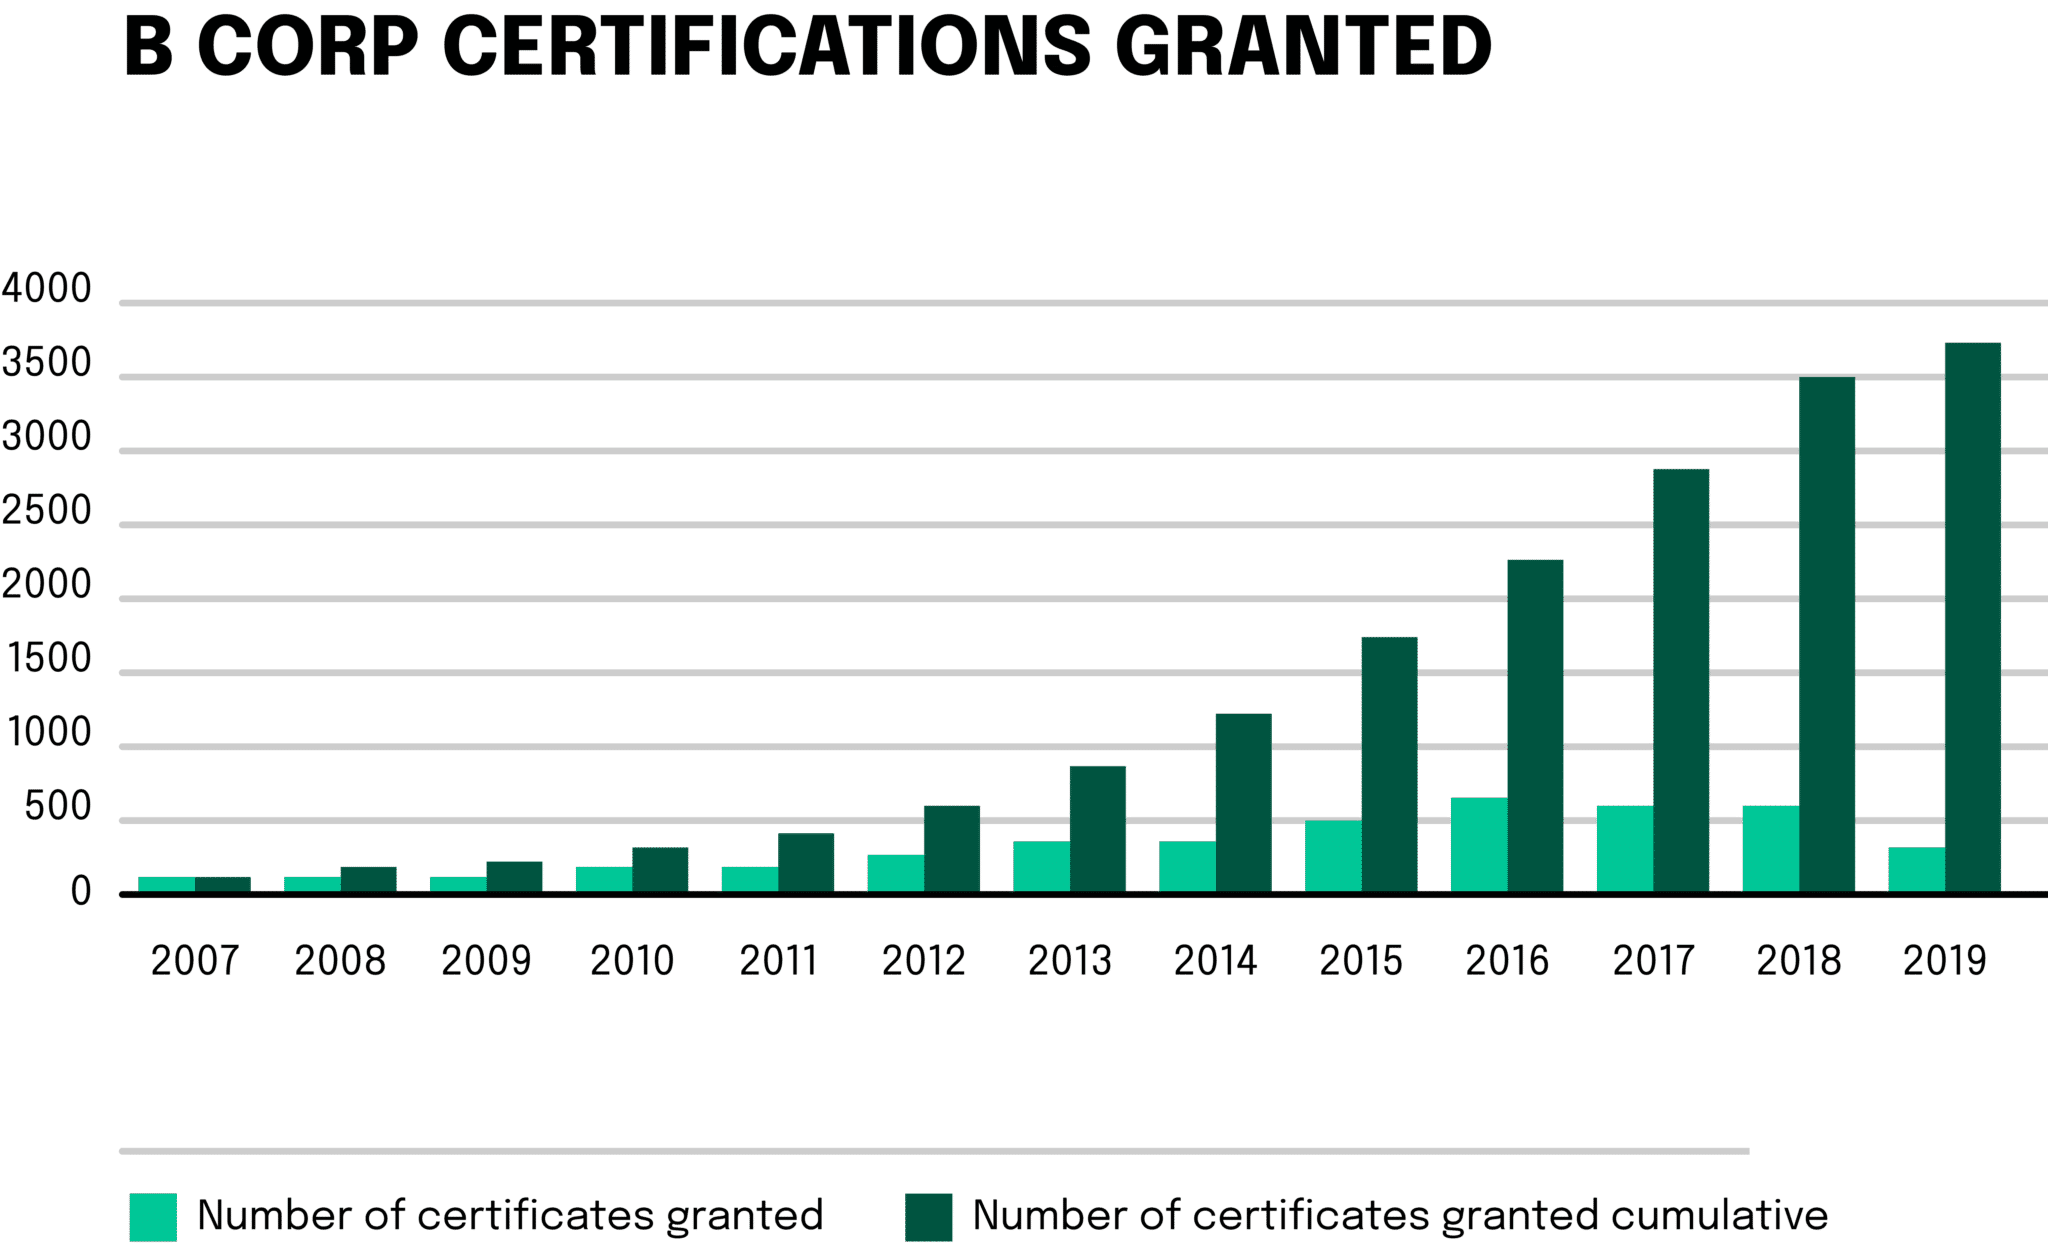 B Corp certifications are rising in popularity. The rate of new certification being awarded slowed down in the last couple of years. However, this is not due to a lack of interest from companies applying. Because B Corp developed new requirements for the certification process, which are more intensive and time-consuming to verify, the rate of new certifications slowed a bit. At the end of 2022, there were already more than 6,000 B Corp certified companies.